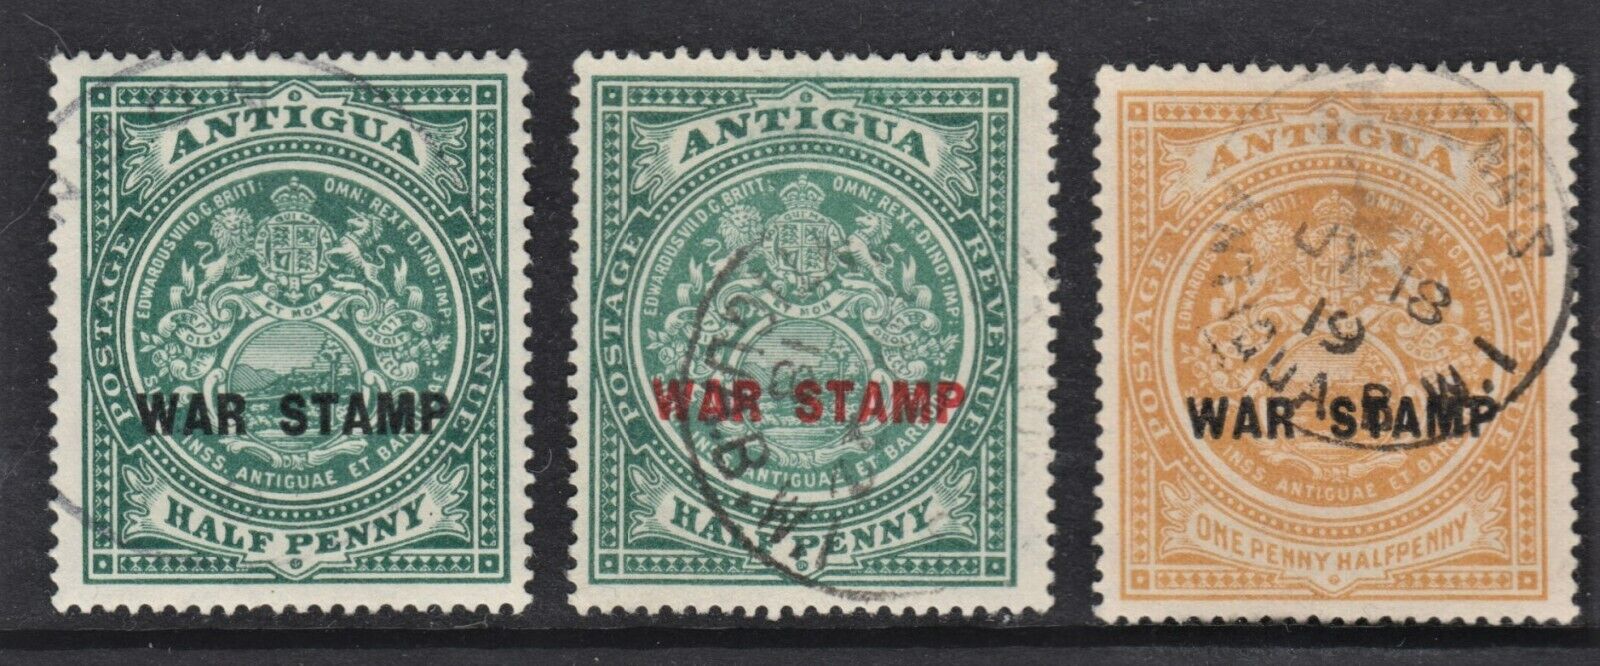 Antigua Fine Used 1916-1918 War Stamp Overprinted Issues